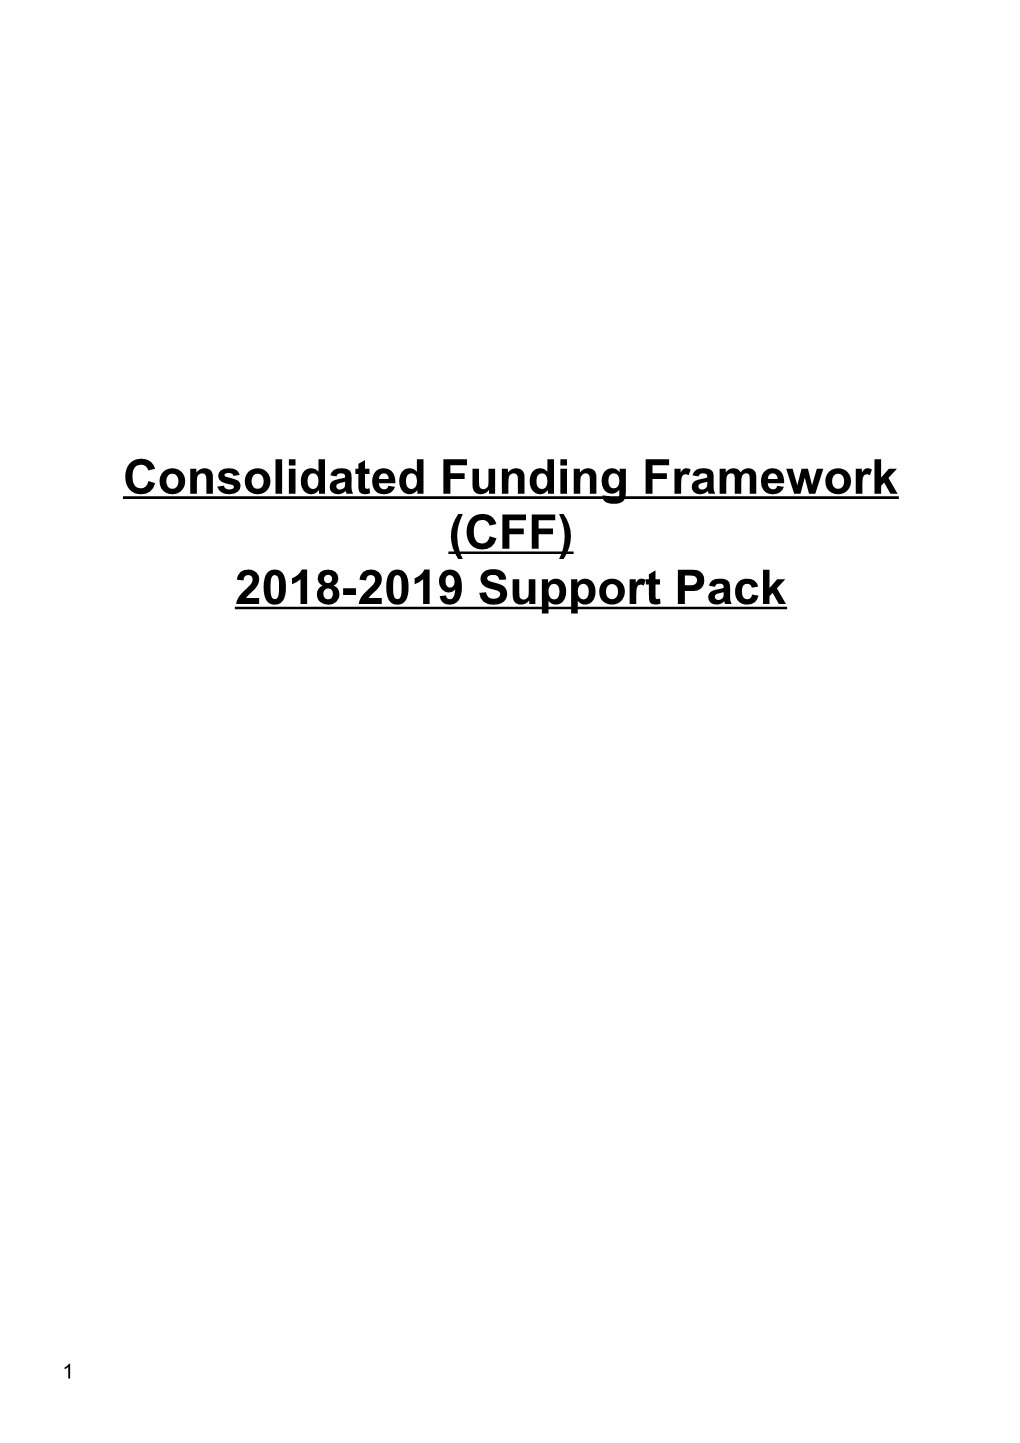 Consolidated Funding Framework (CFF)